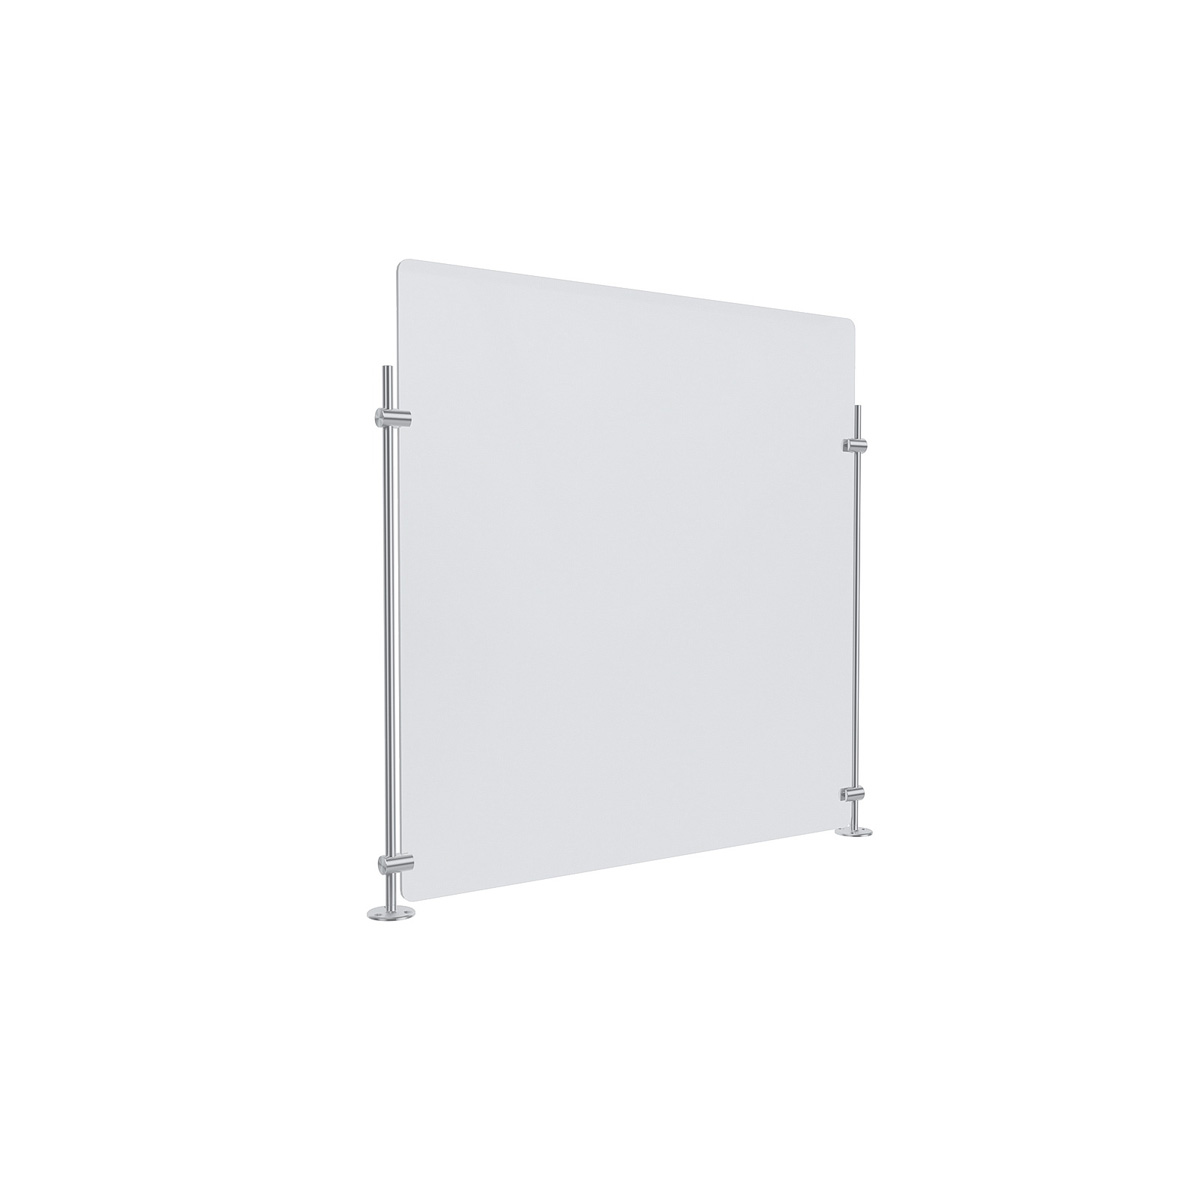 Clear Acrylic Sneeze Guard 23-1/2'' Wide x 23-1/2'' Tall, with (2) 20'' Tall x 3/8'' Diameter Clear Anodized Aluminum Rods on the Side